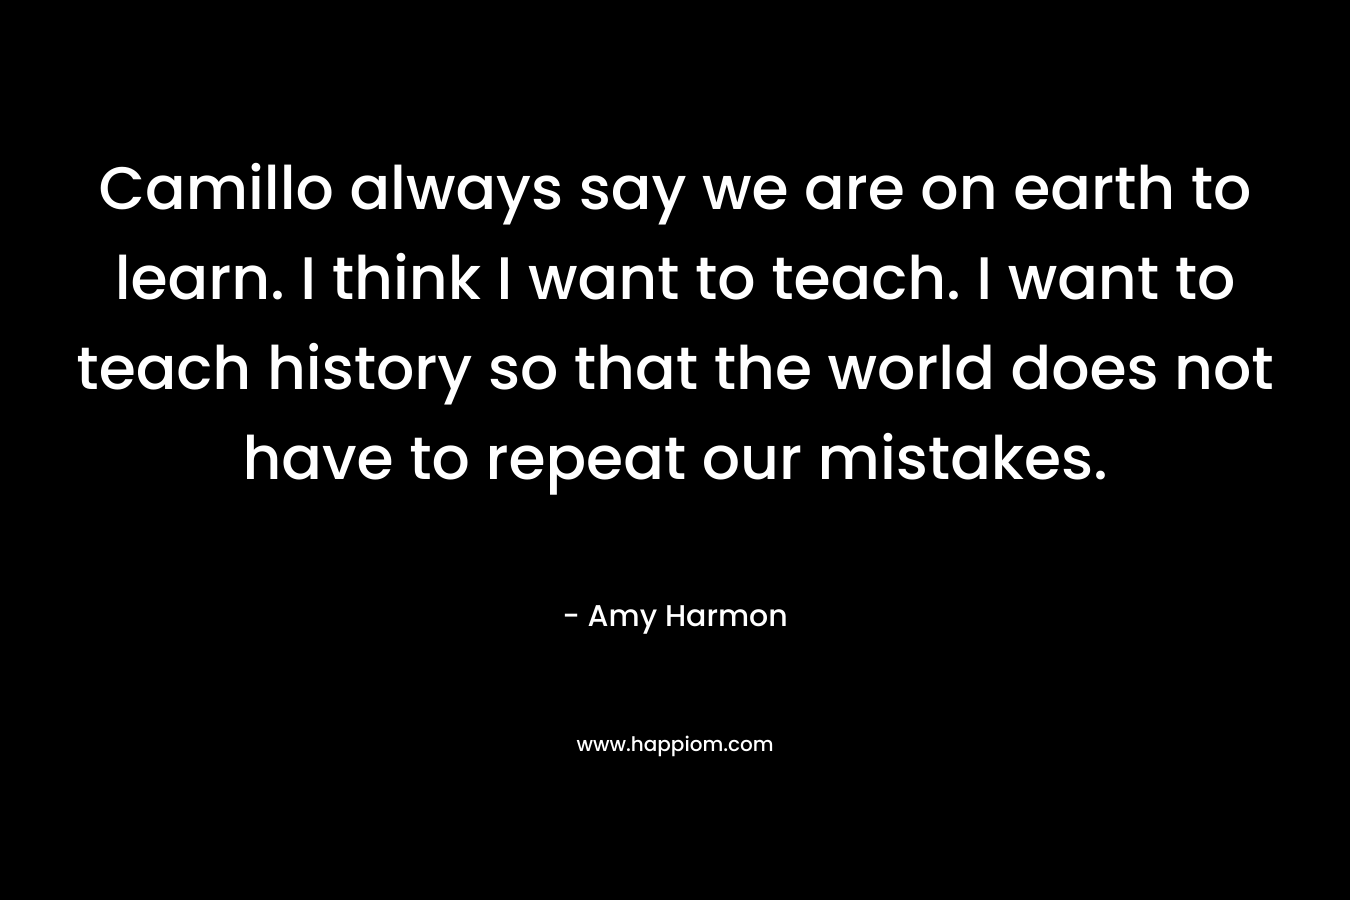 Camillo always say we are on earth to learn. I think I want to teach. I want to teach history so that the world does not have to repeat our mistakes.